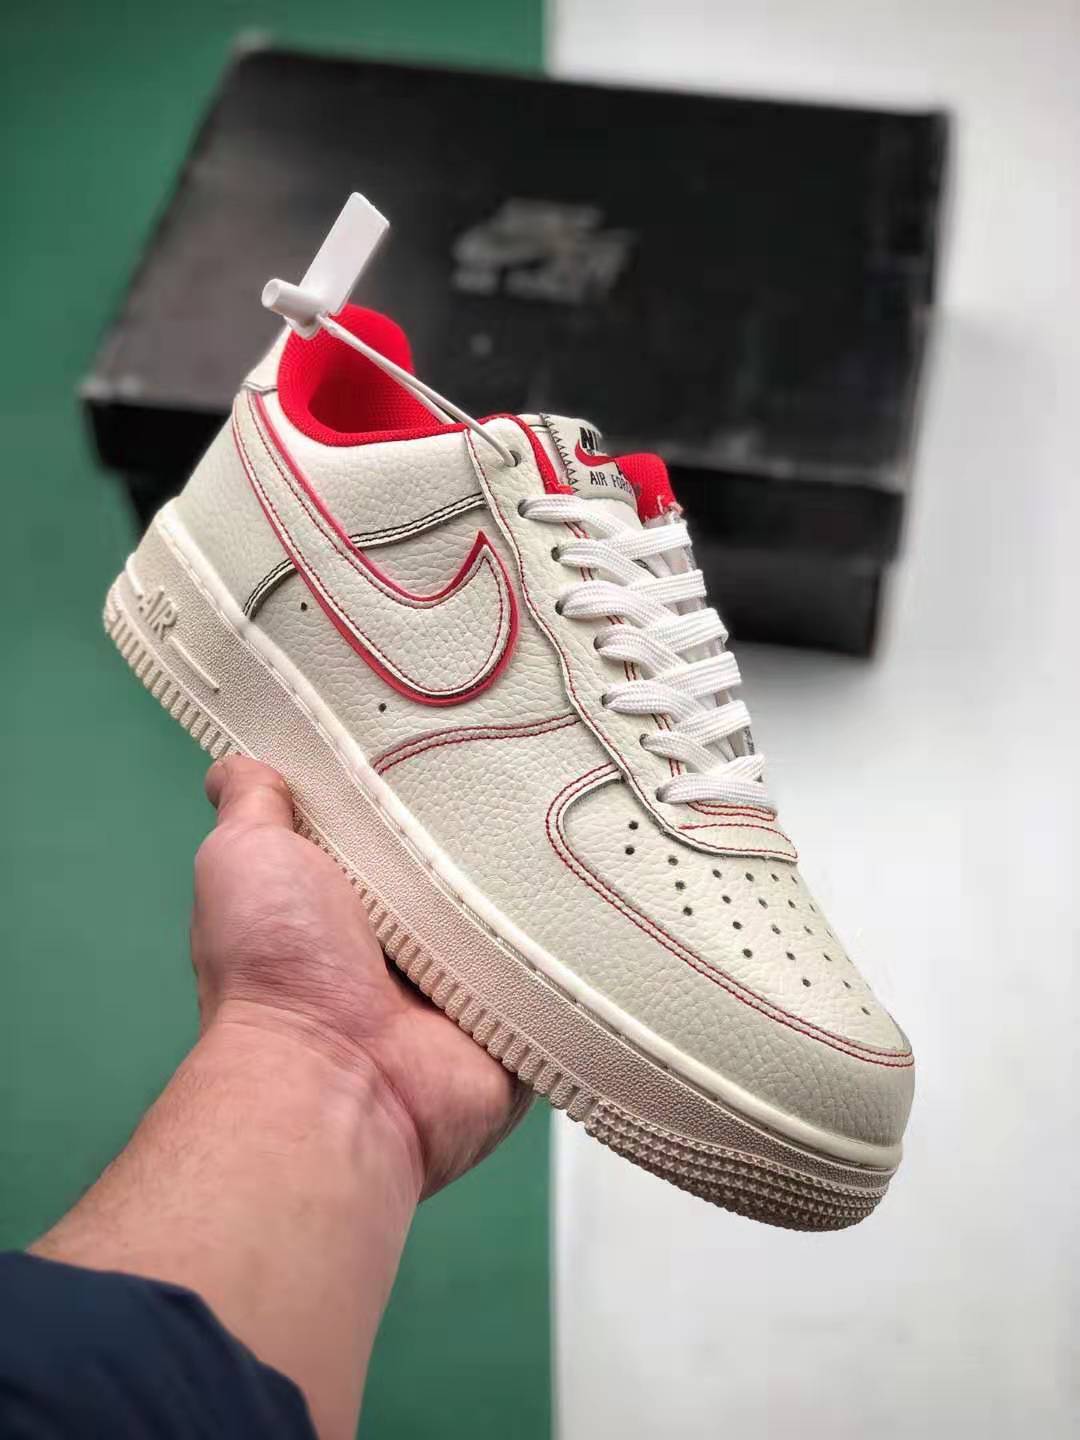 Nike Air Force 1 Low White Orange Red AO2518-116 - Stylish and Bold Footwear